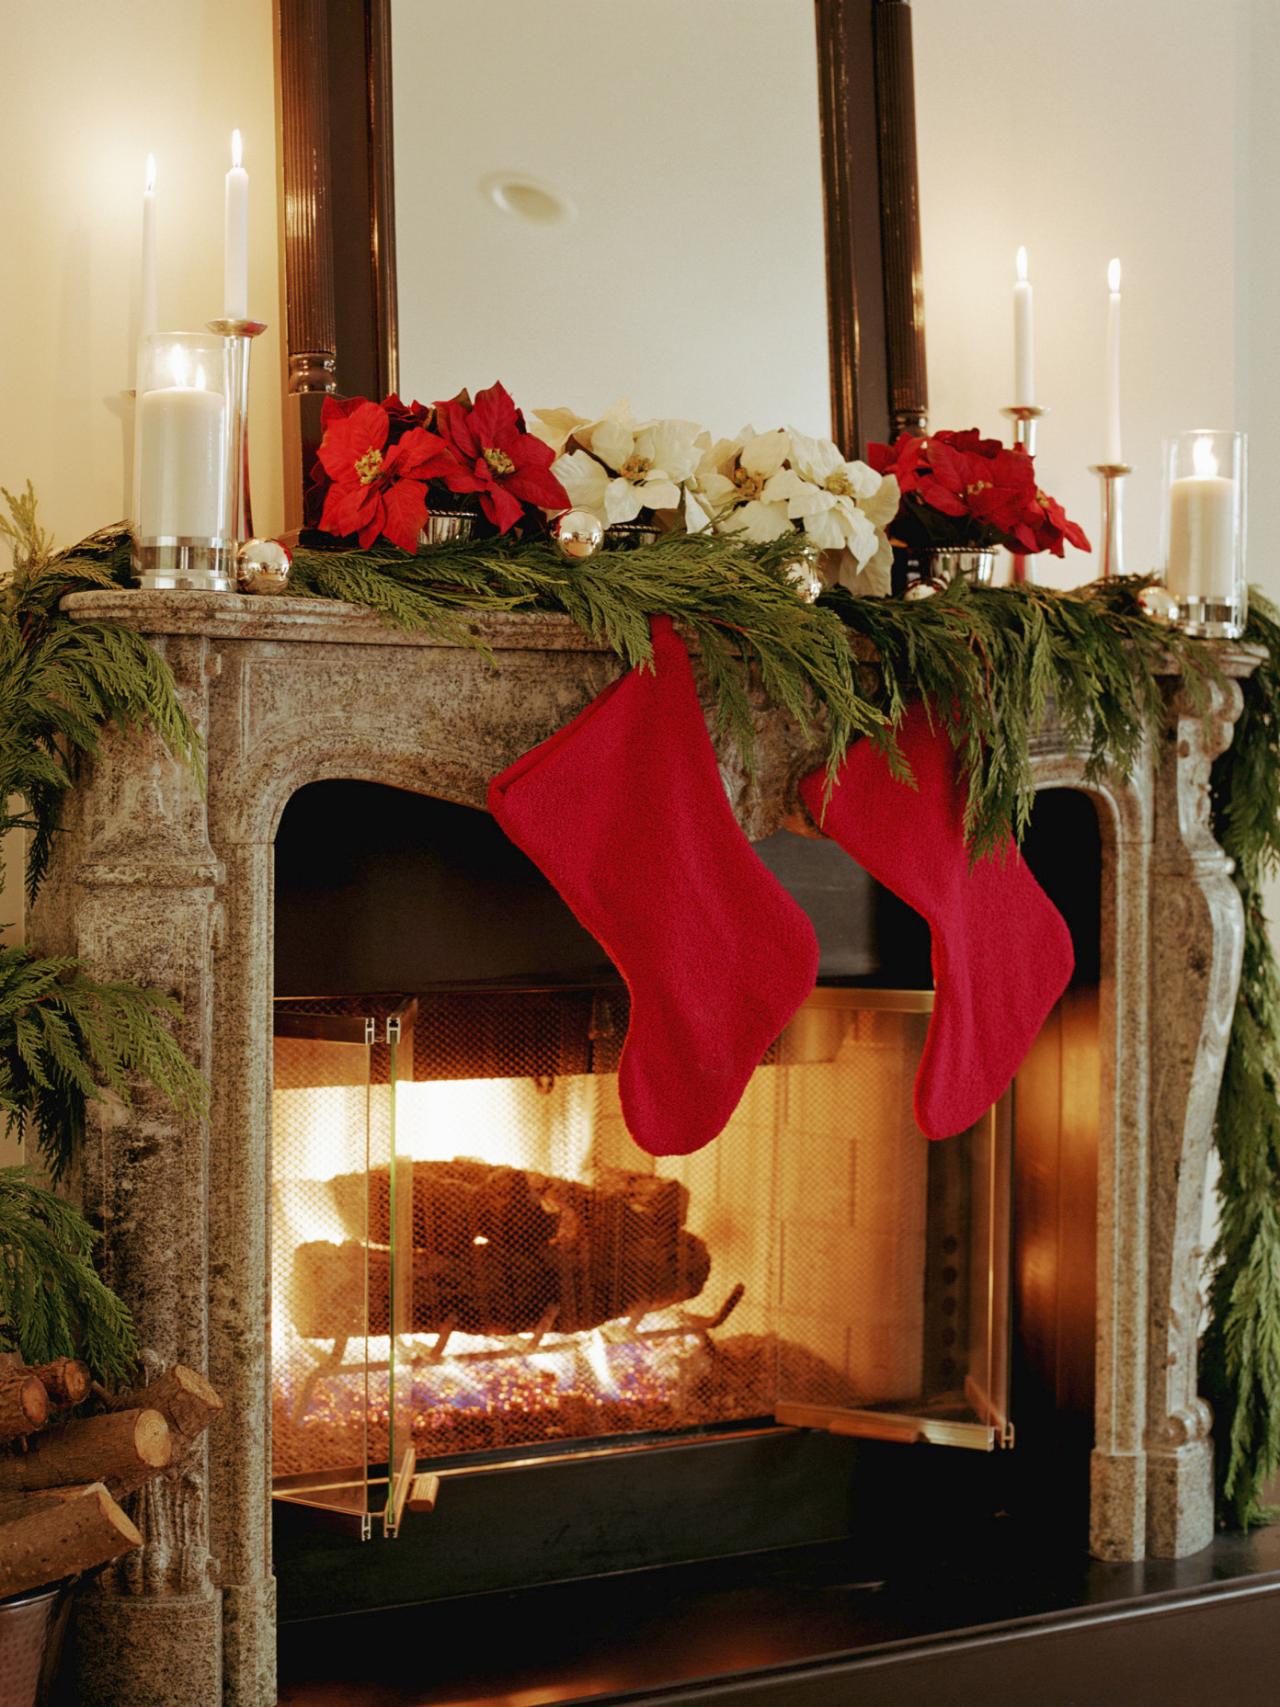 Pinterest Ideas For Decorating Mantle For Christmas / Mantel ...